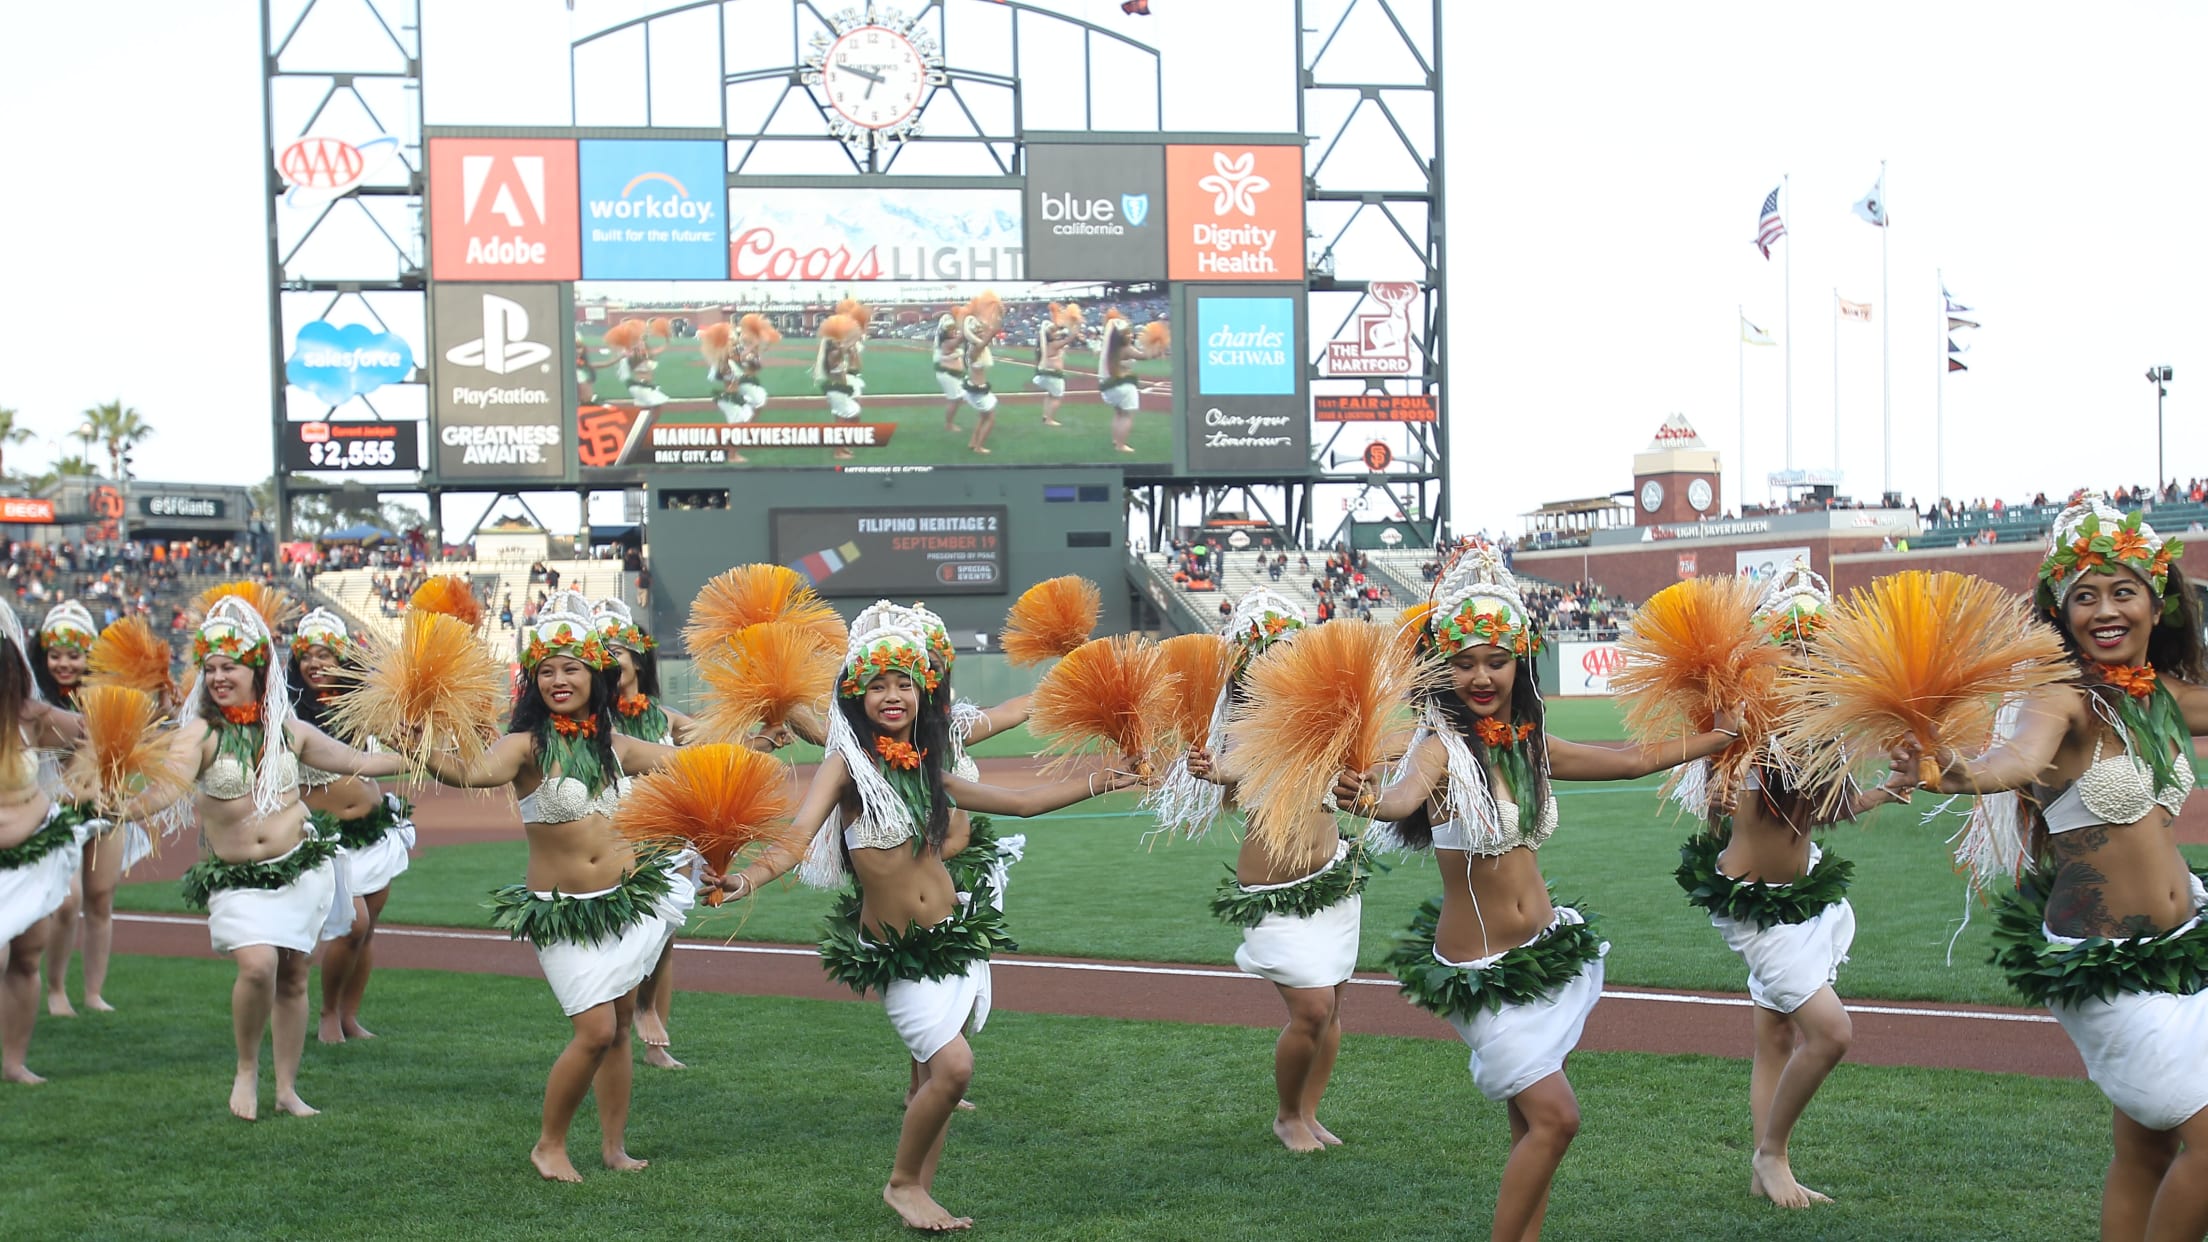 SFGiants] In celebration of African American Heritage Day on Saturday at  @OracleParkSF, the #SFGiants will wear San Francisco Sea Lions jerseys on  the field. : r/baseball